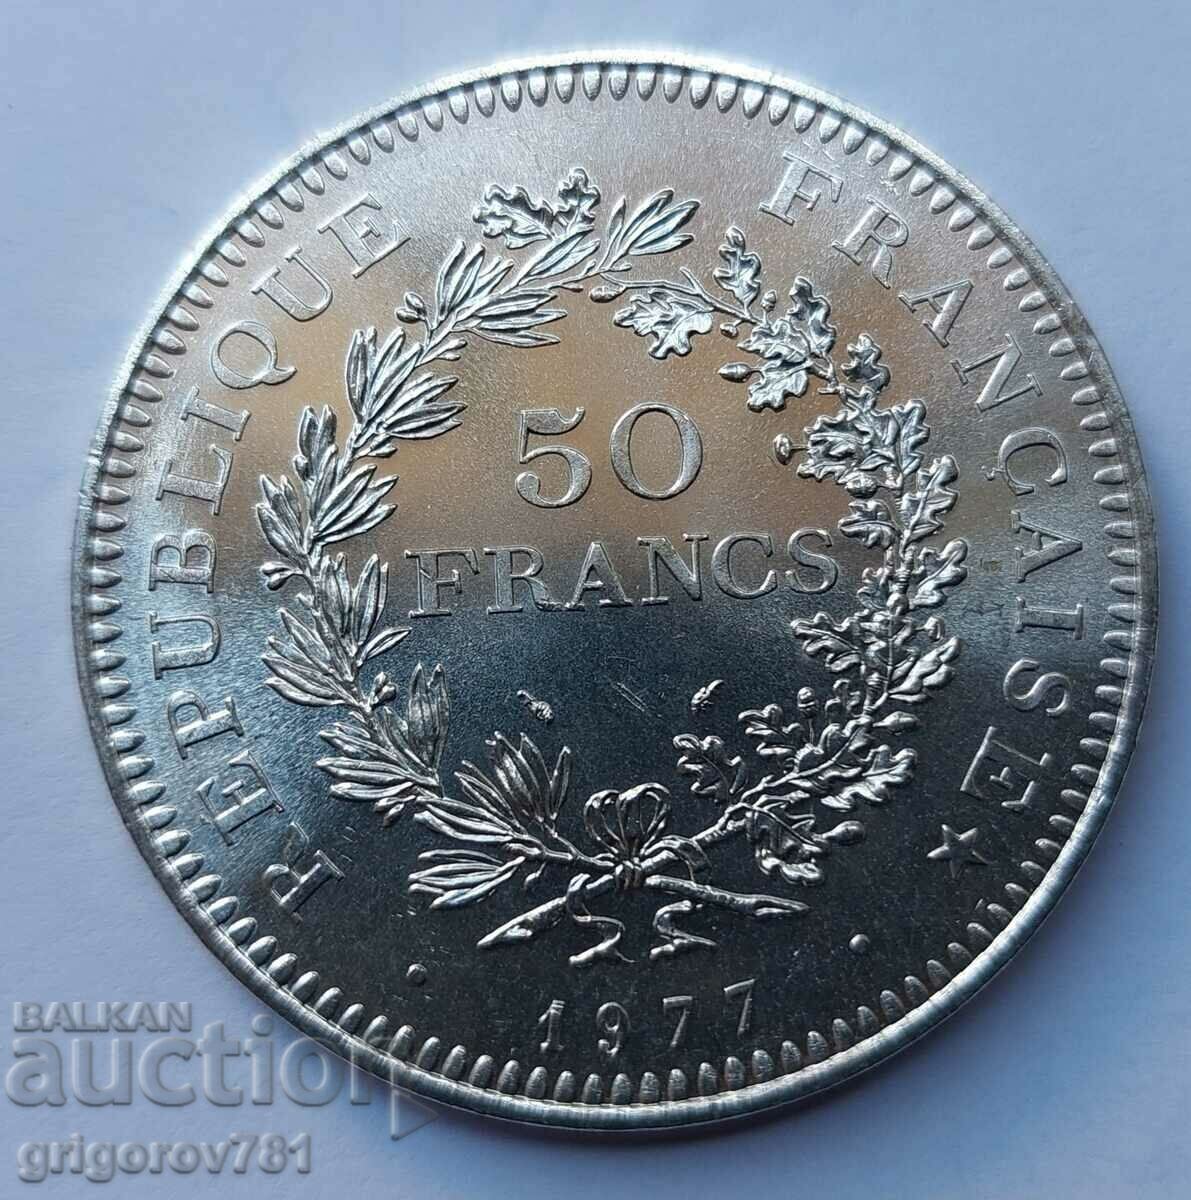 50 Francs Silver France 1977 - Silver Coin #34